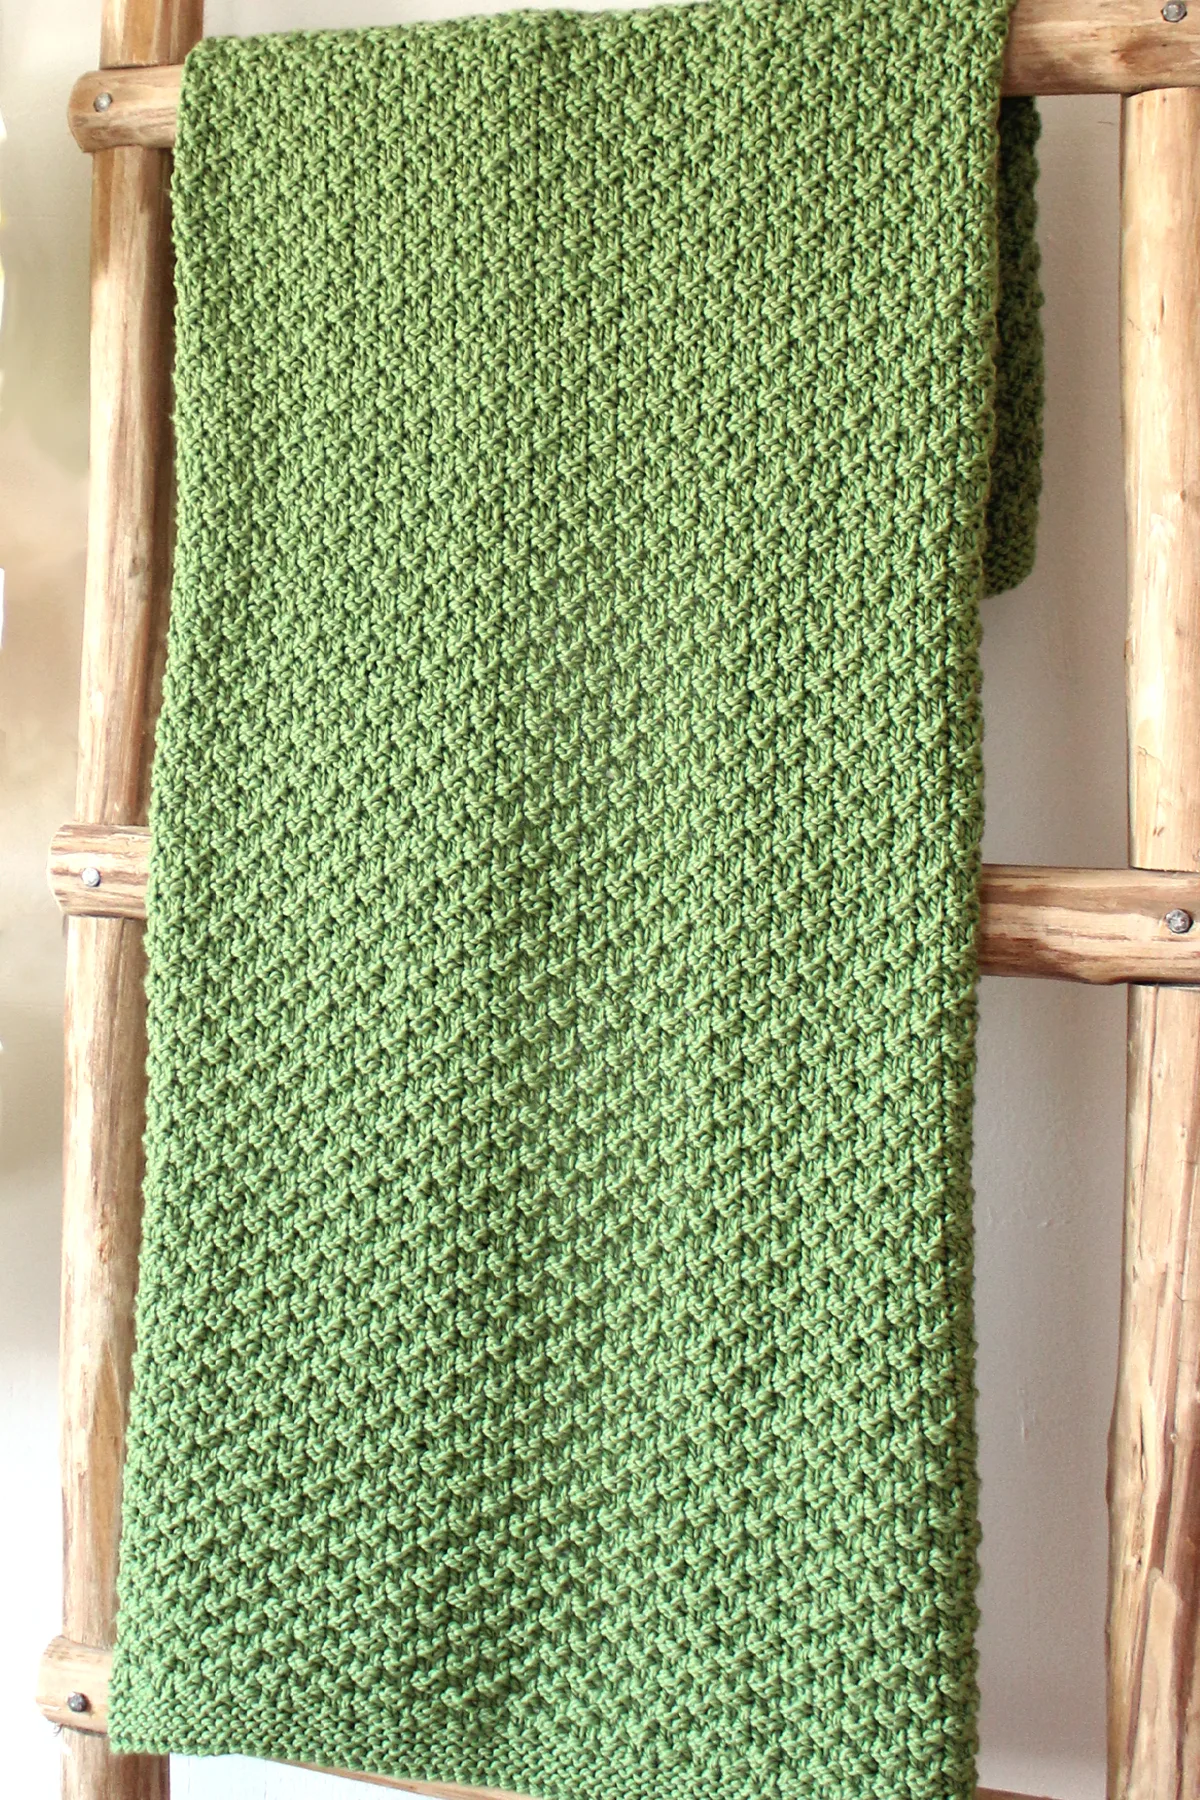 Lapghan sized knitted blanket in green yarn color with Double Moss Stitch.